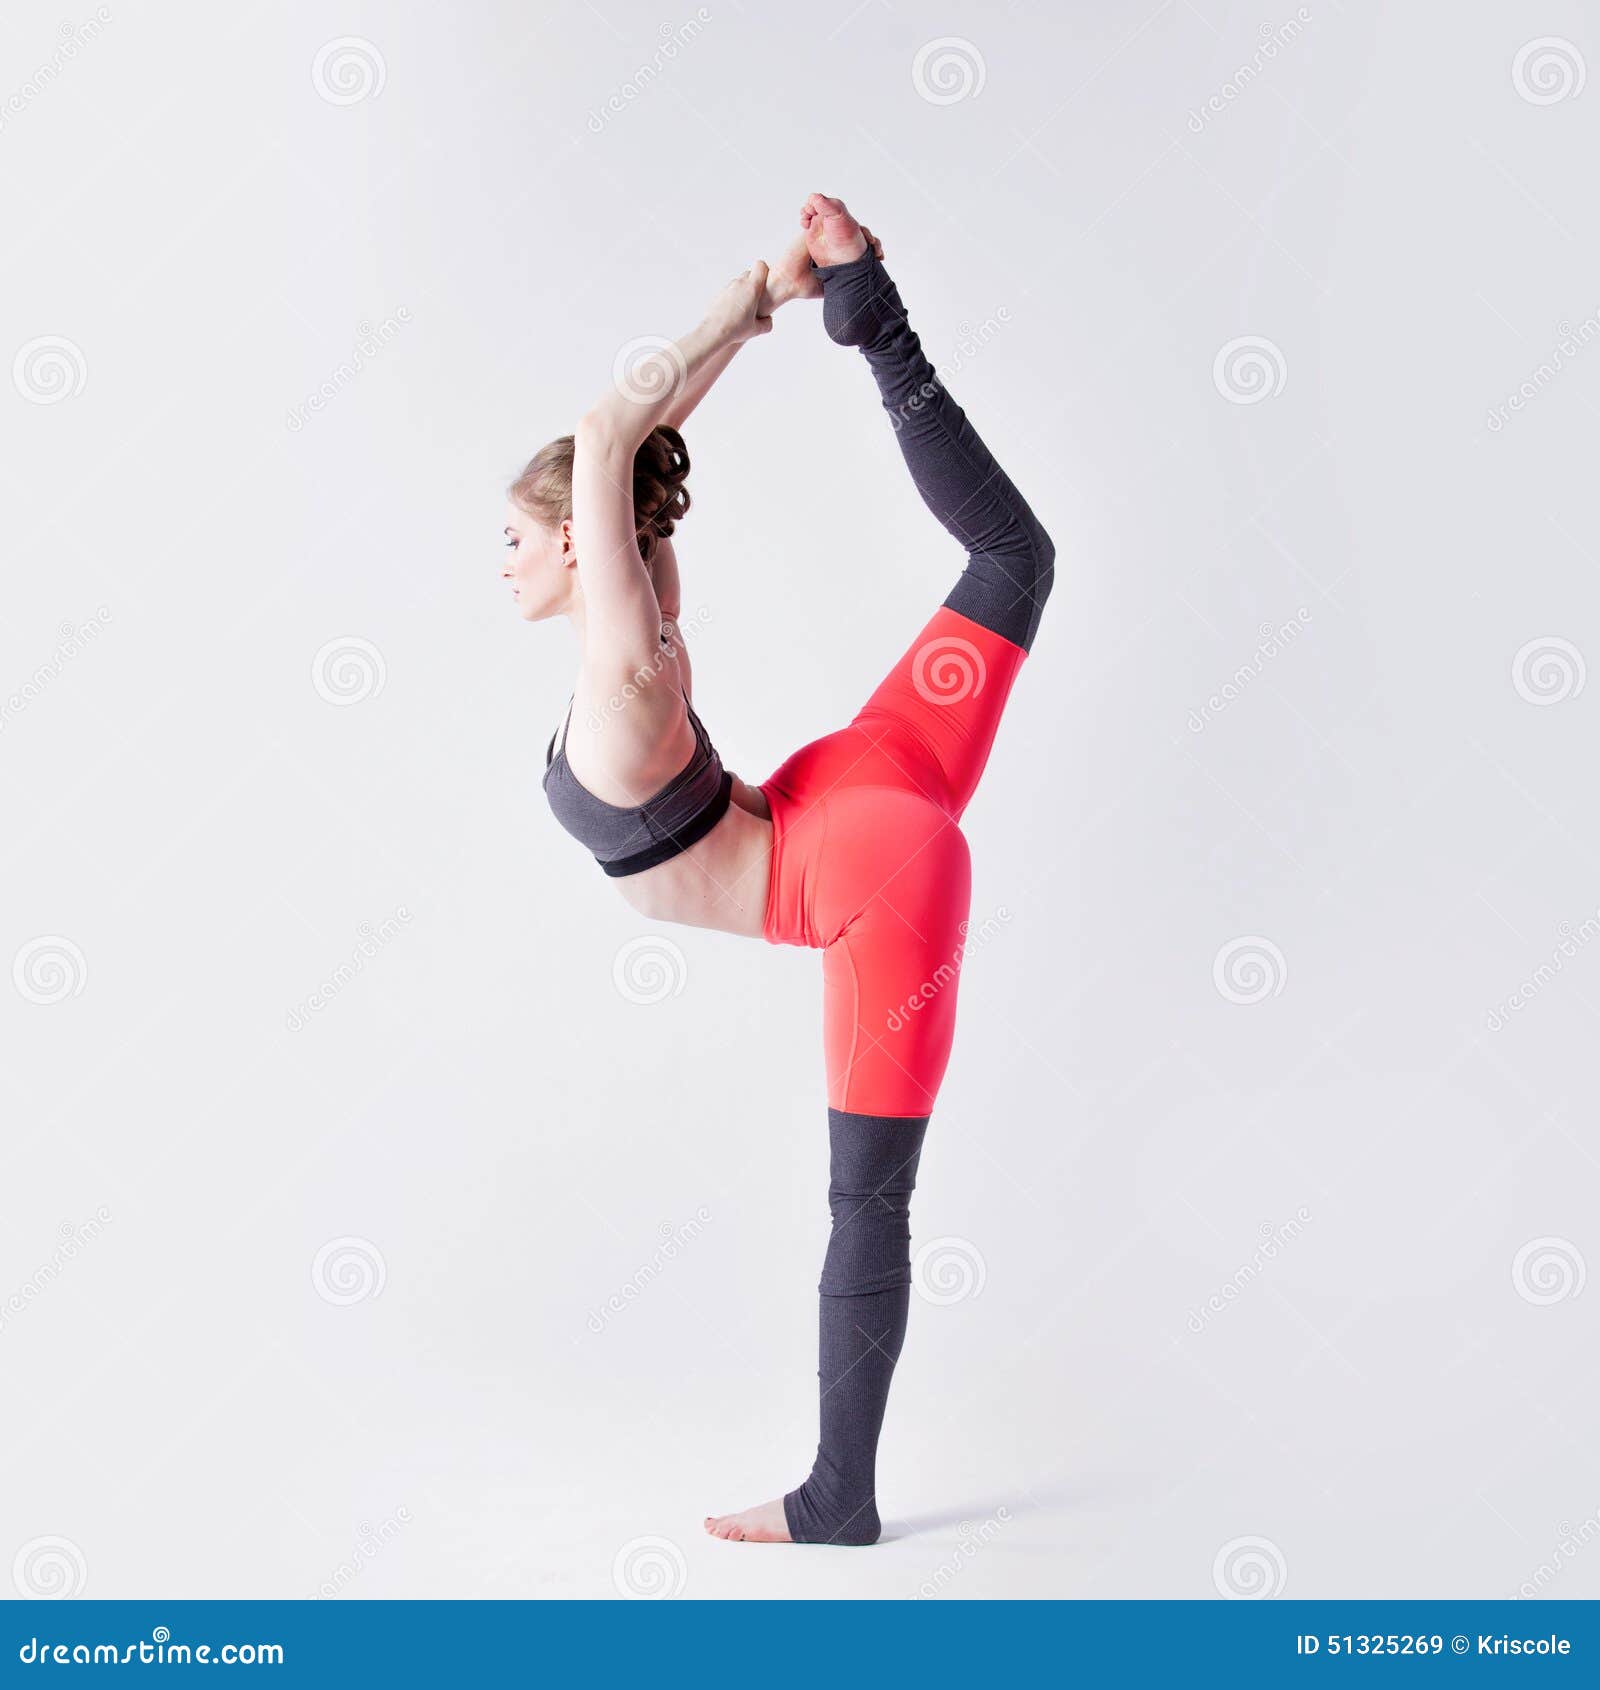 327 Sexual Yoga Stock Photos - Free & Royalty-Free Stock Photos from  Dreamstime